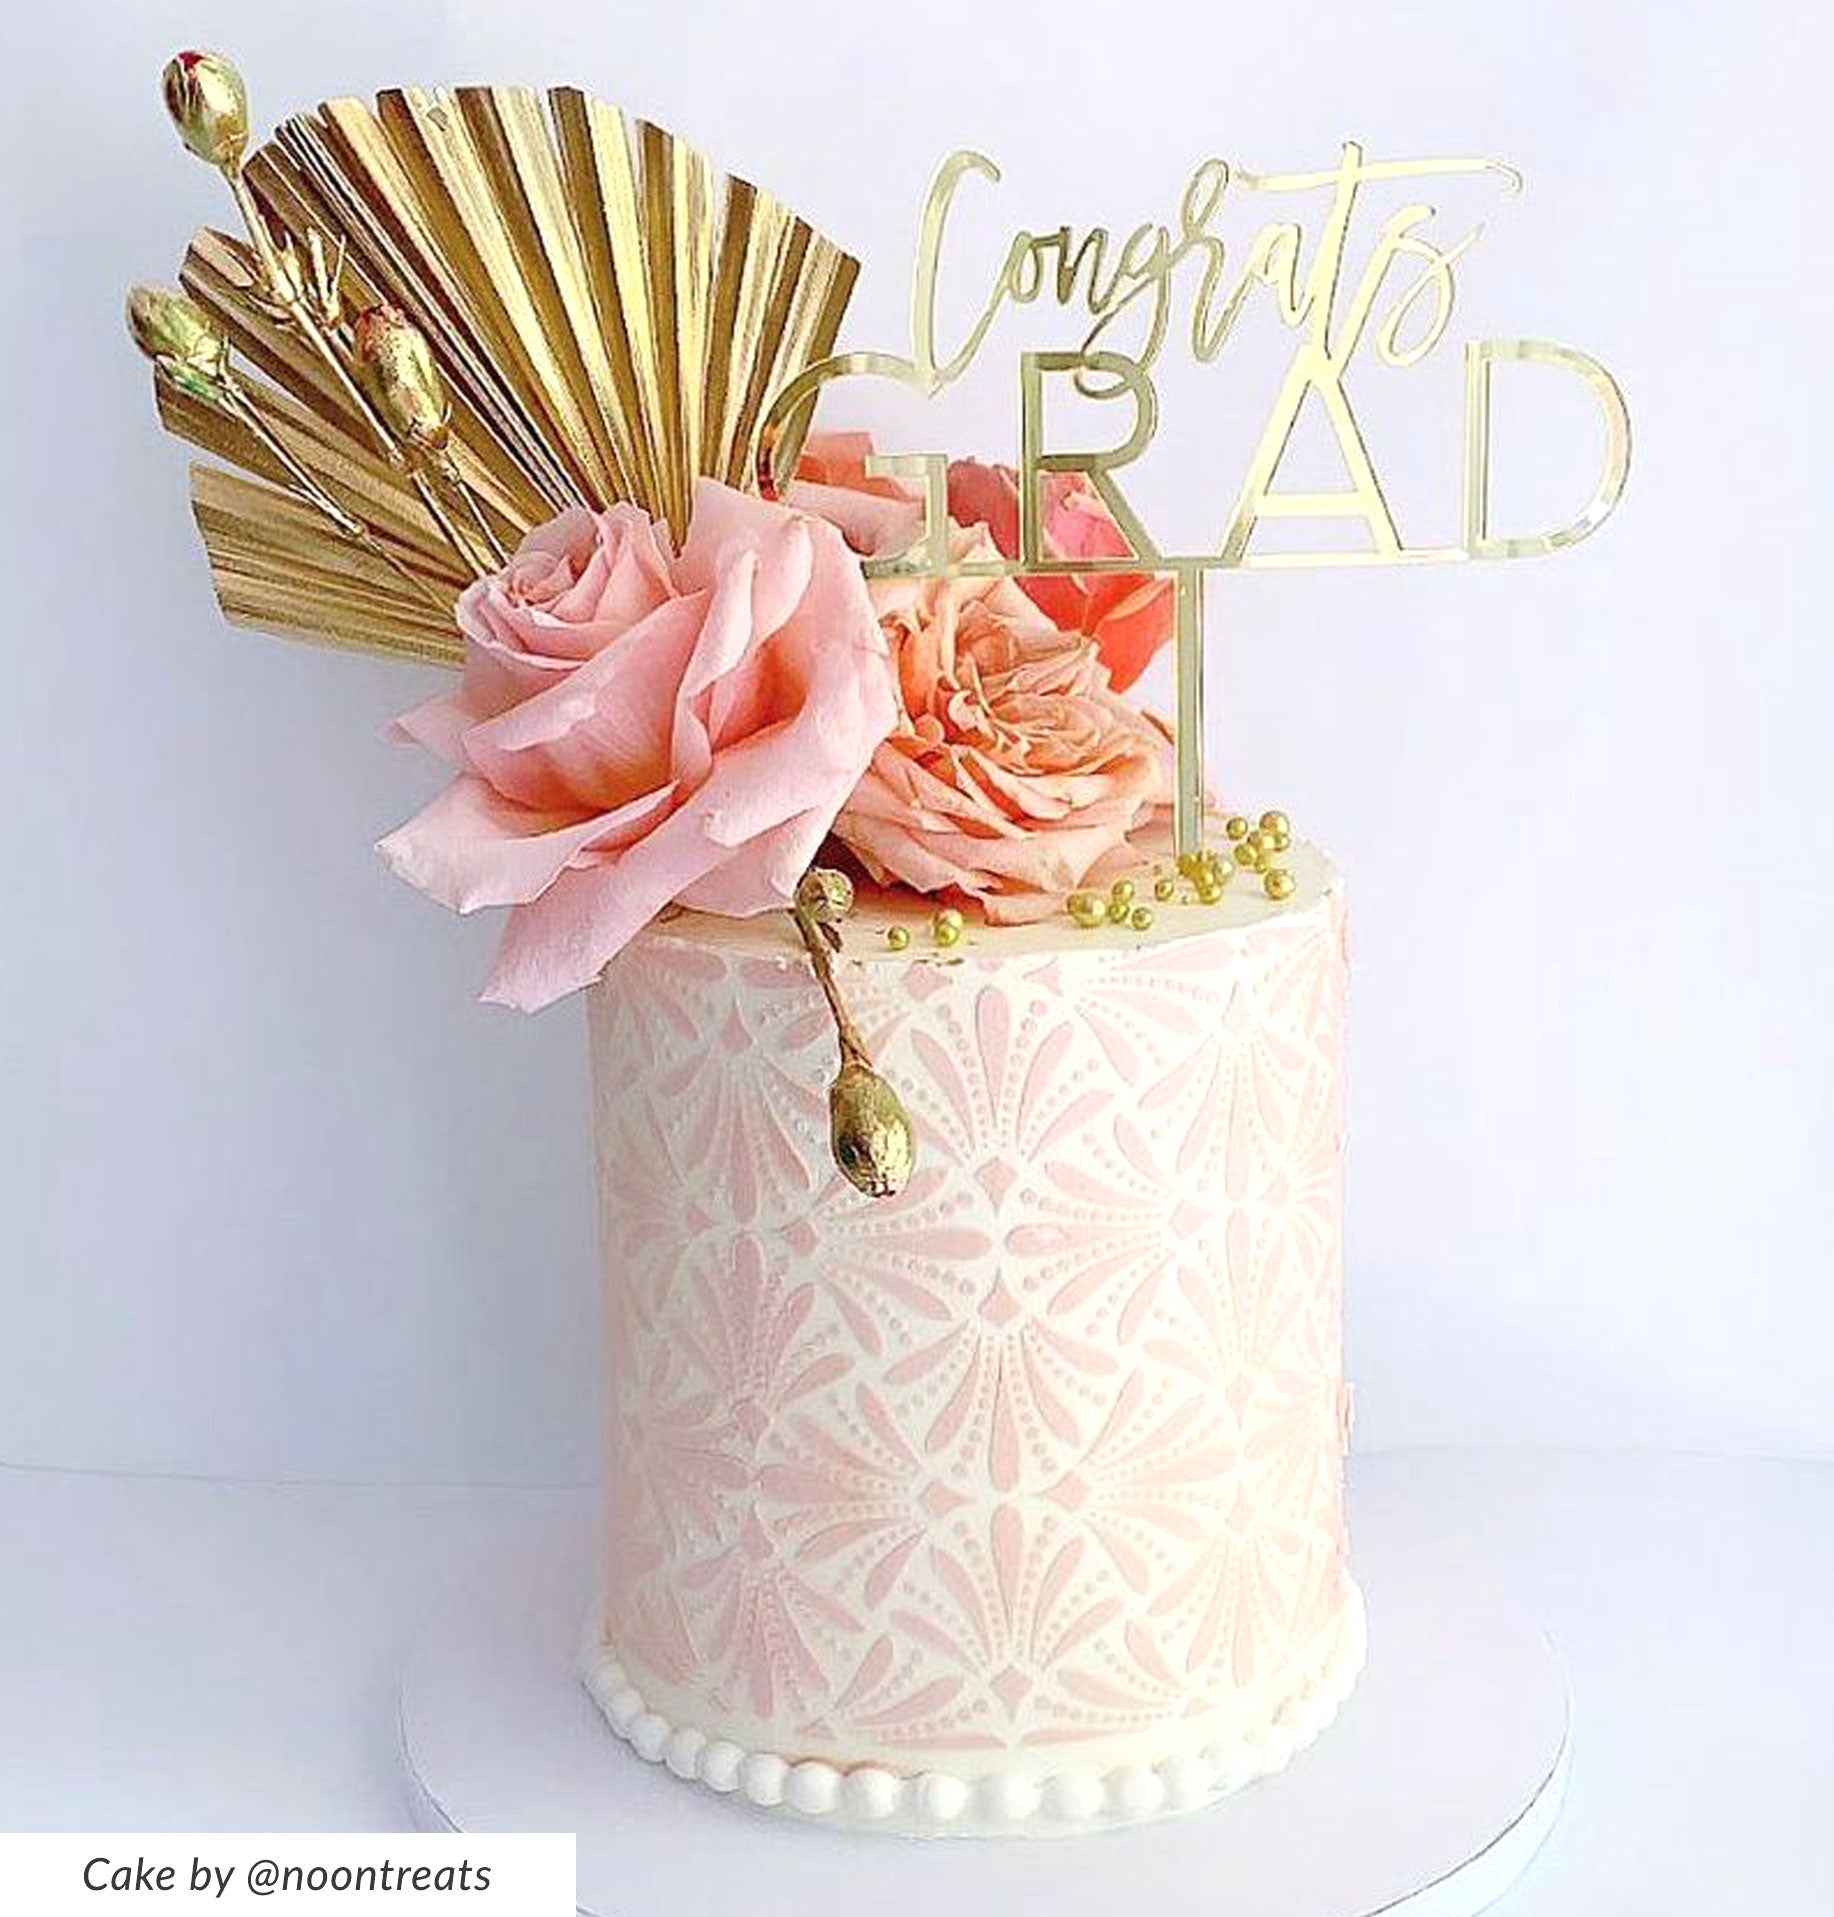 2 Methods To Decorate A Cake With A Stencil